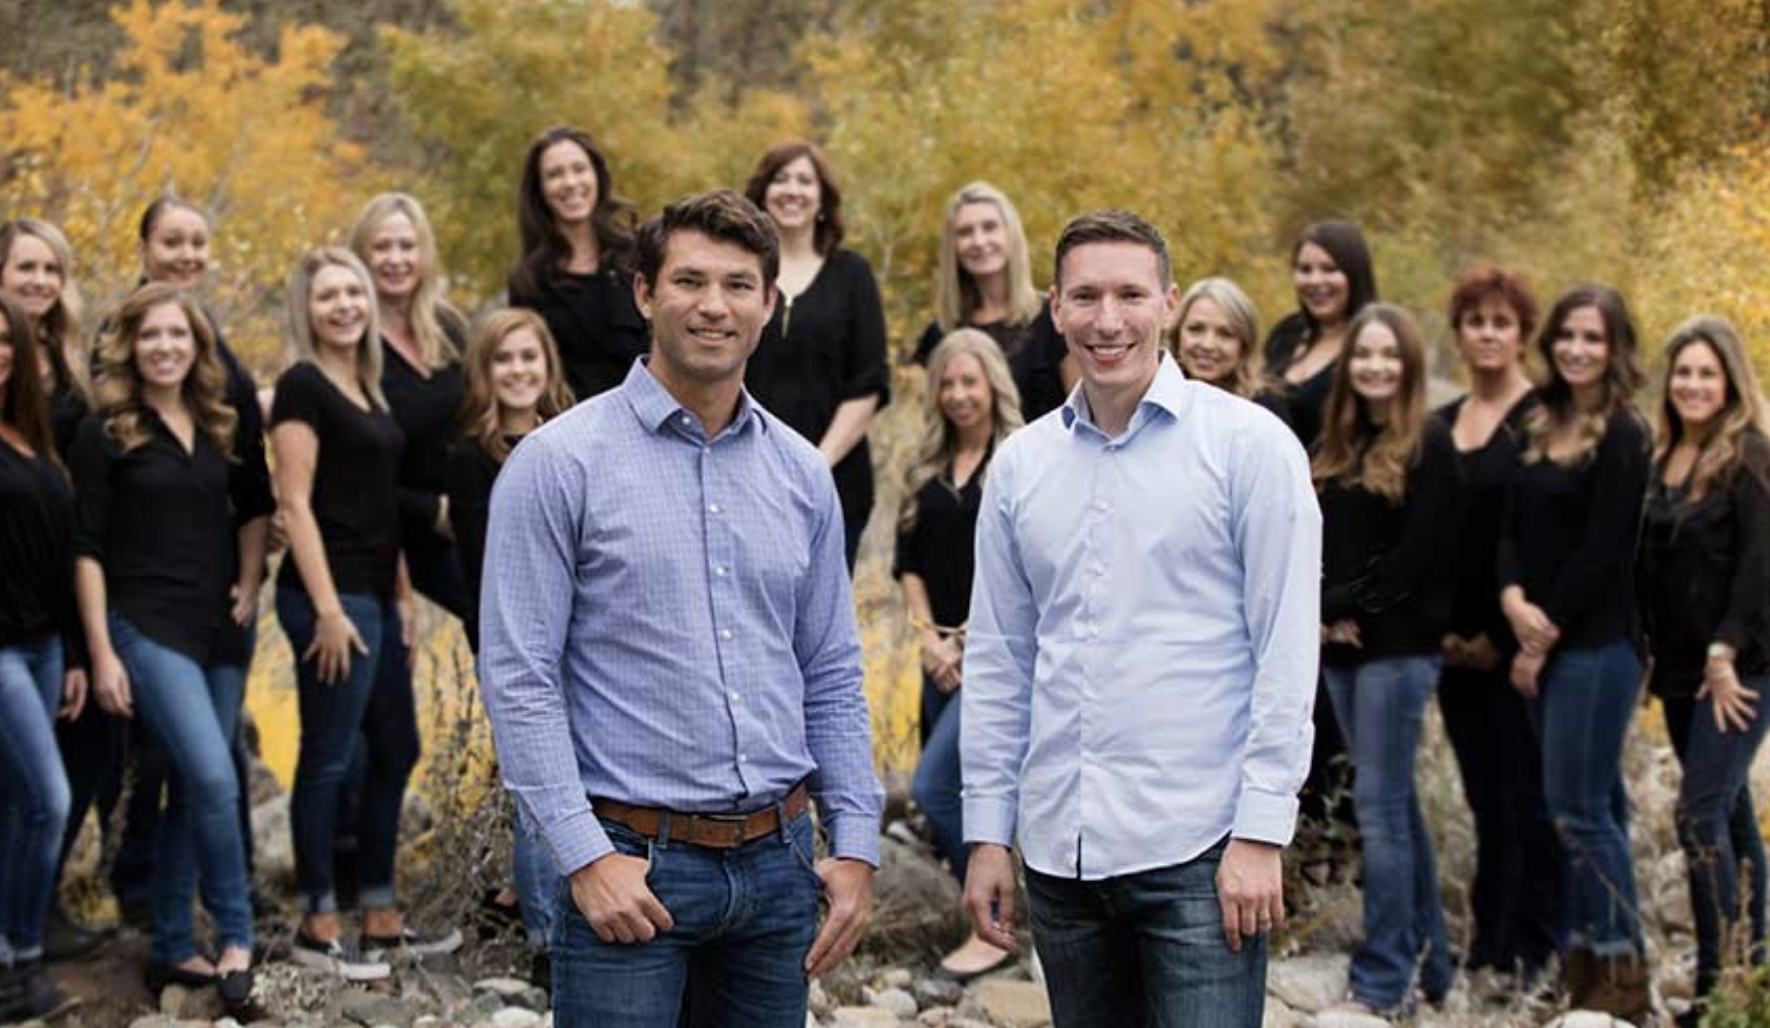 Team at DaBell and Paventy Orthodontics